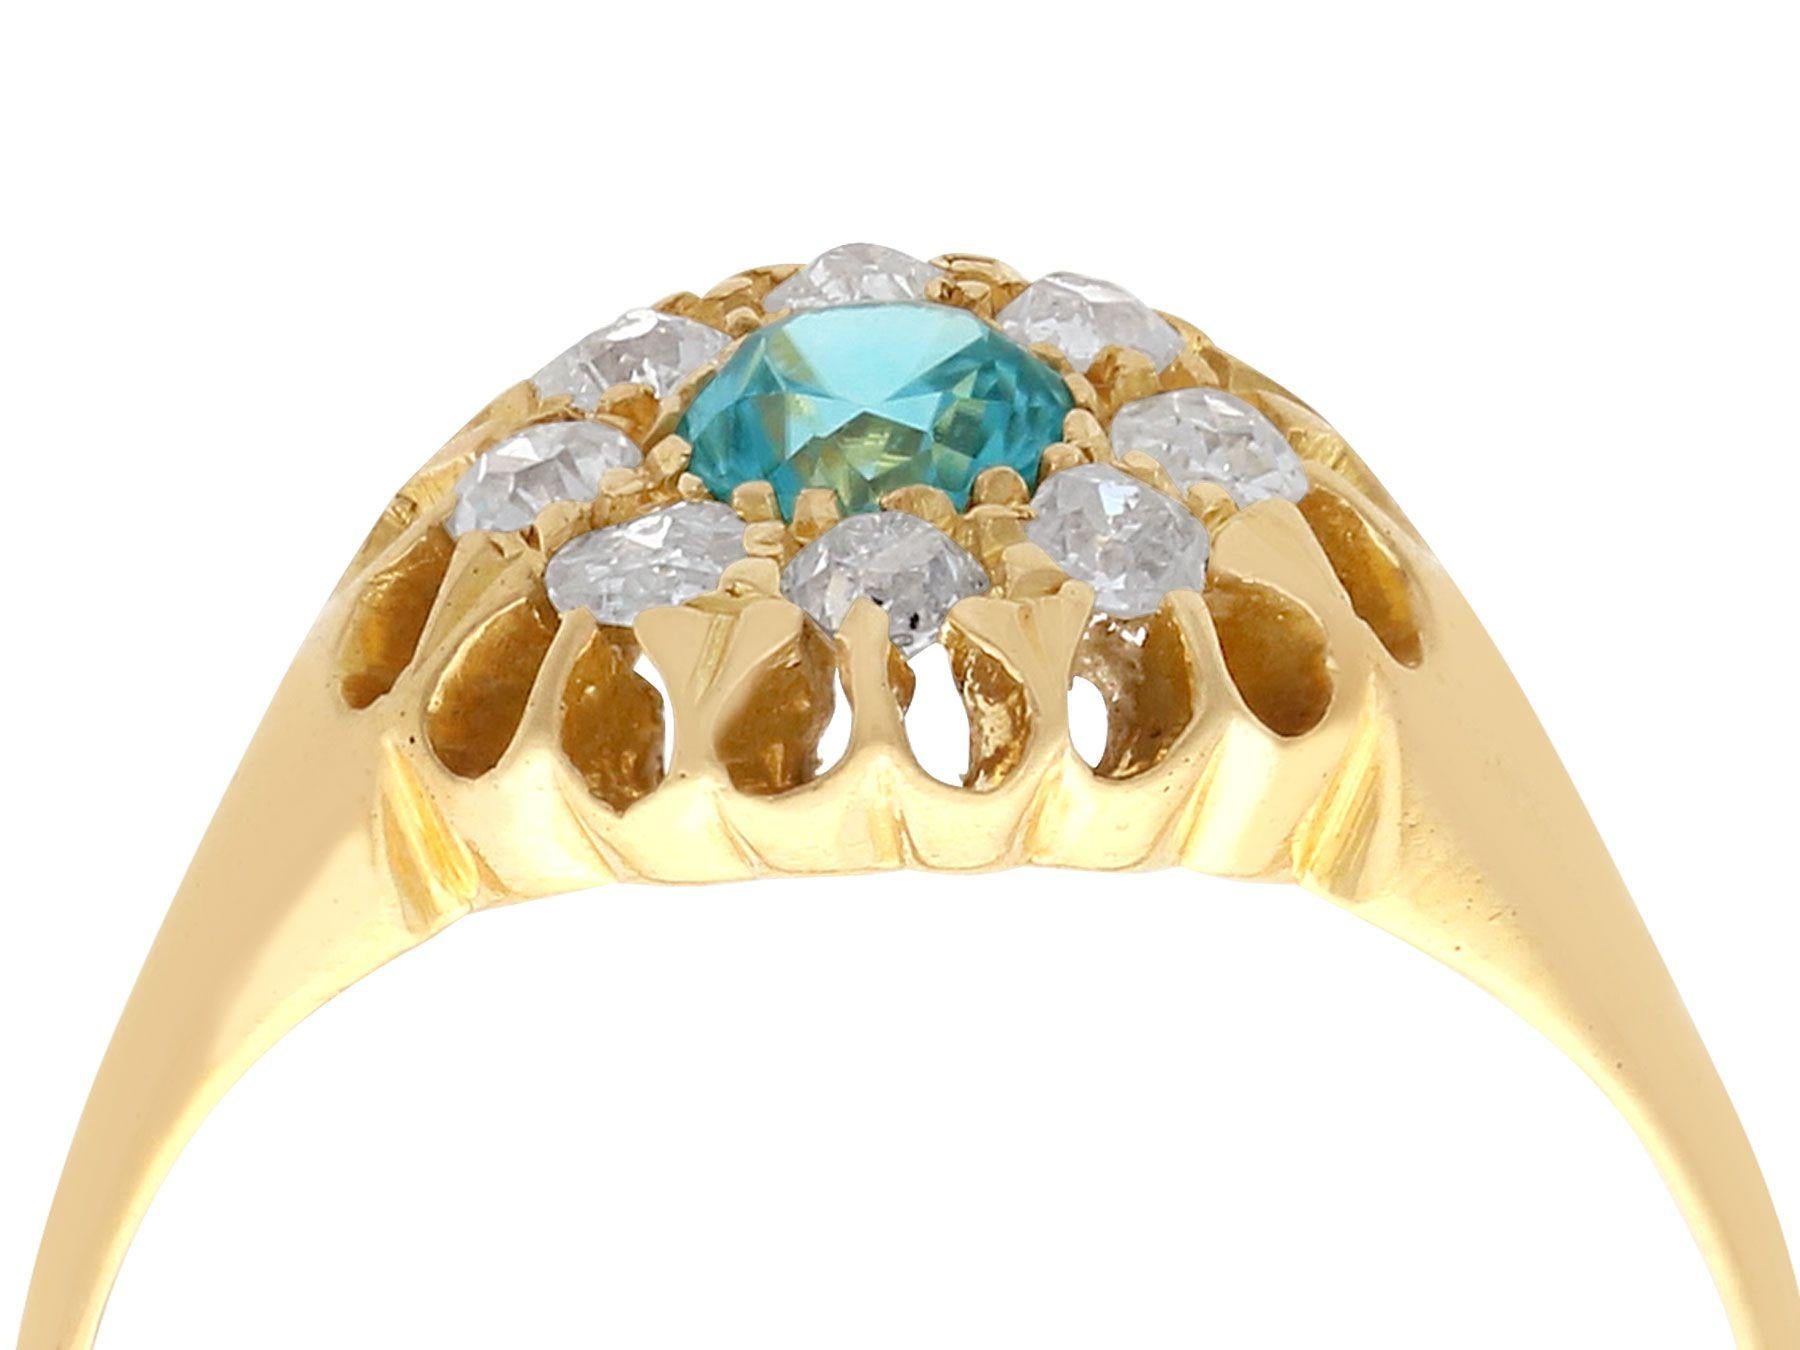 A fine antique blue zircon and 0.28 carat diamond, 18 karat yellow gold dress ring; part of our diverse antique jewelry and estate jewelry collections.

This fine antique blue zircon and diamond ring has been crafted in 18k yellow gold.

The pierced